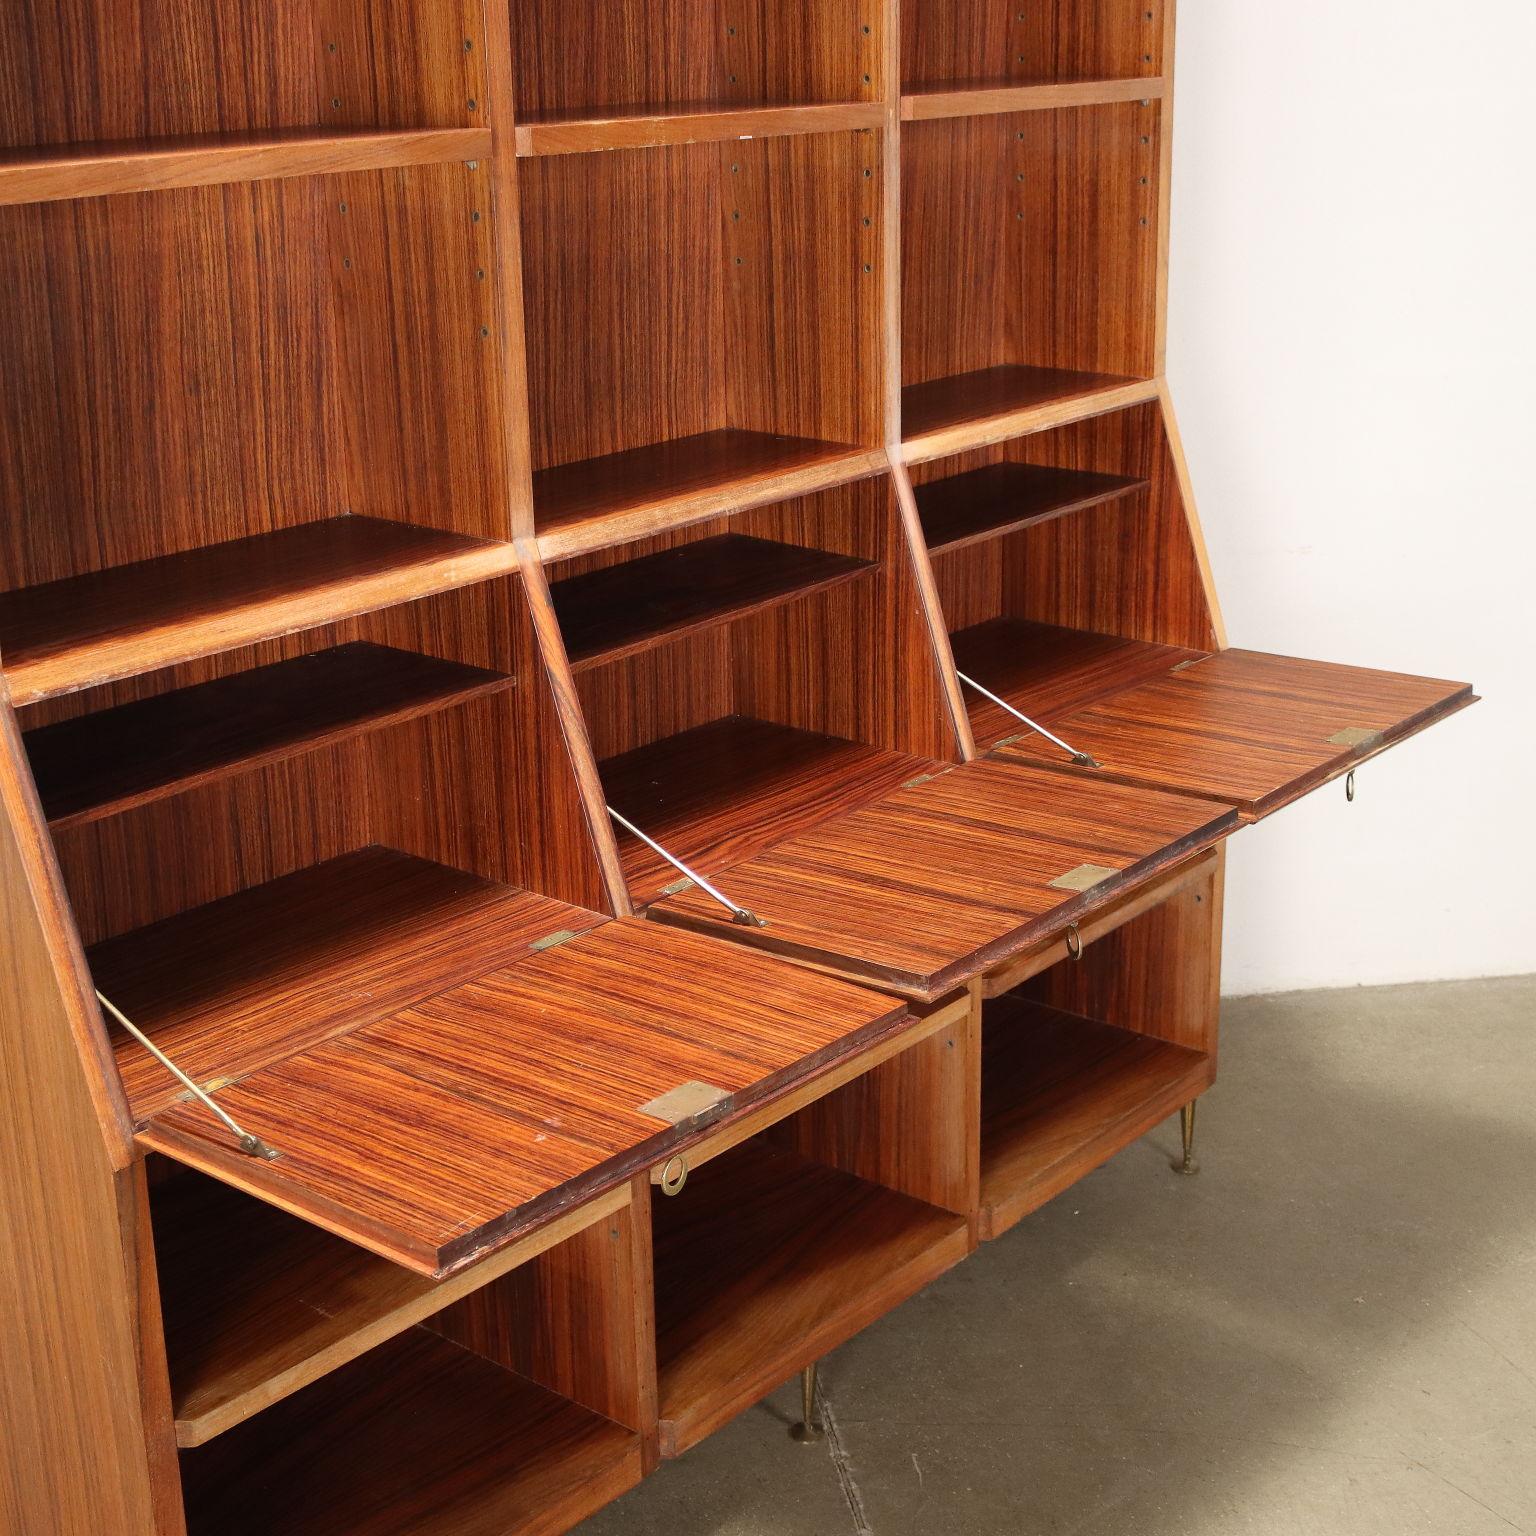 Vintage Bookshelf Exotic Wood, Italy, 1960s For Sale 2